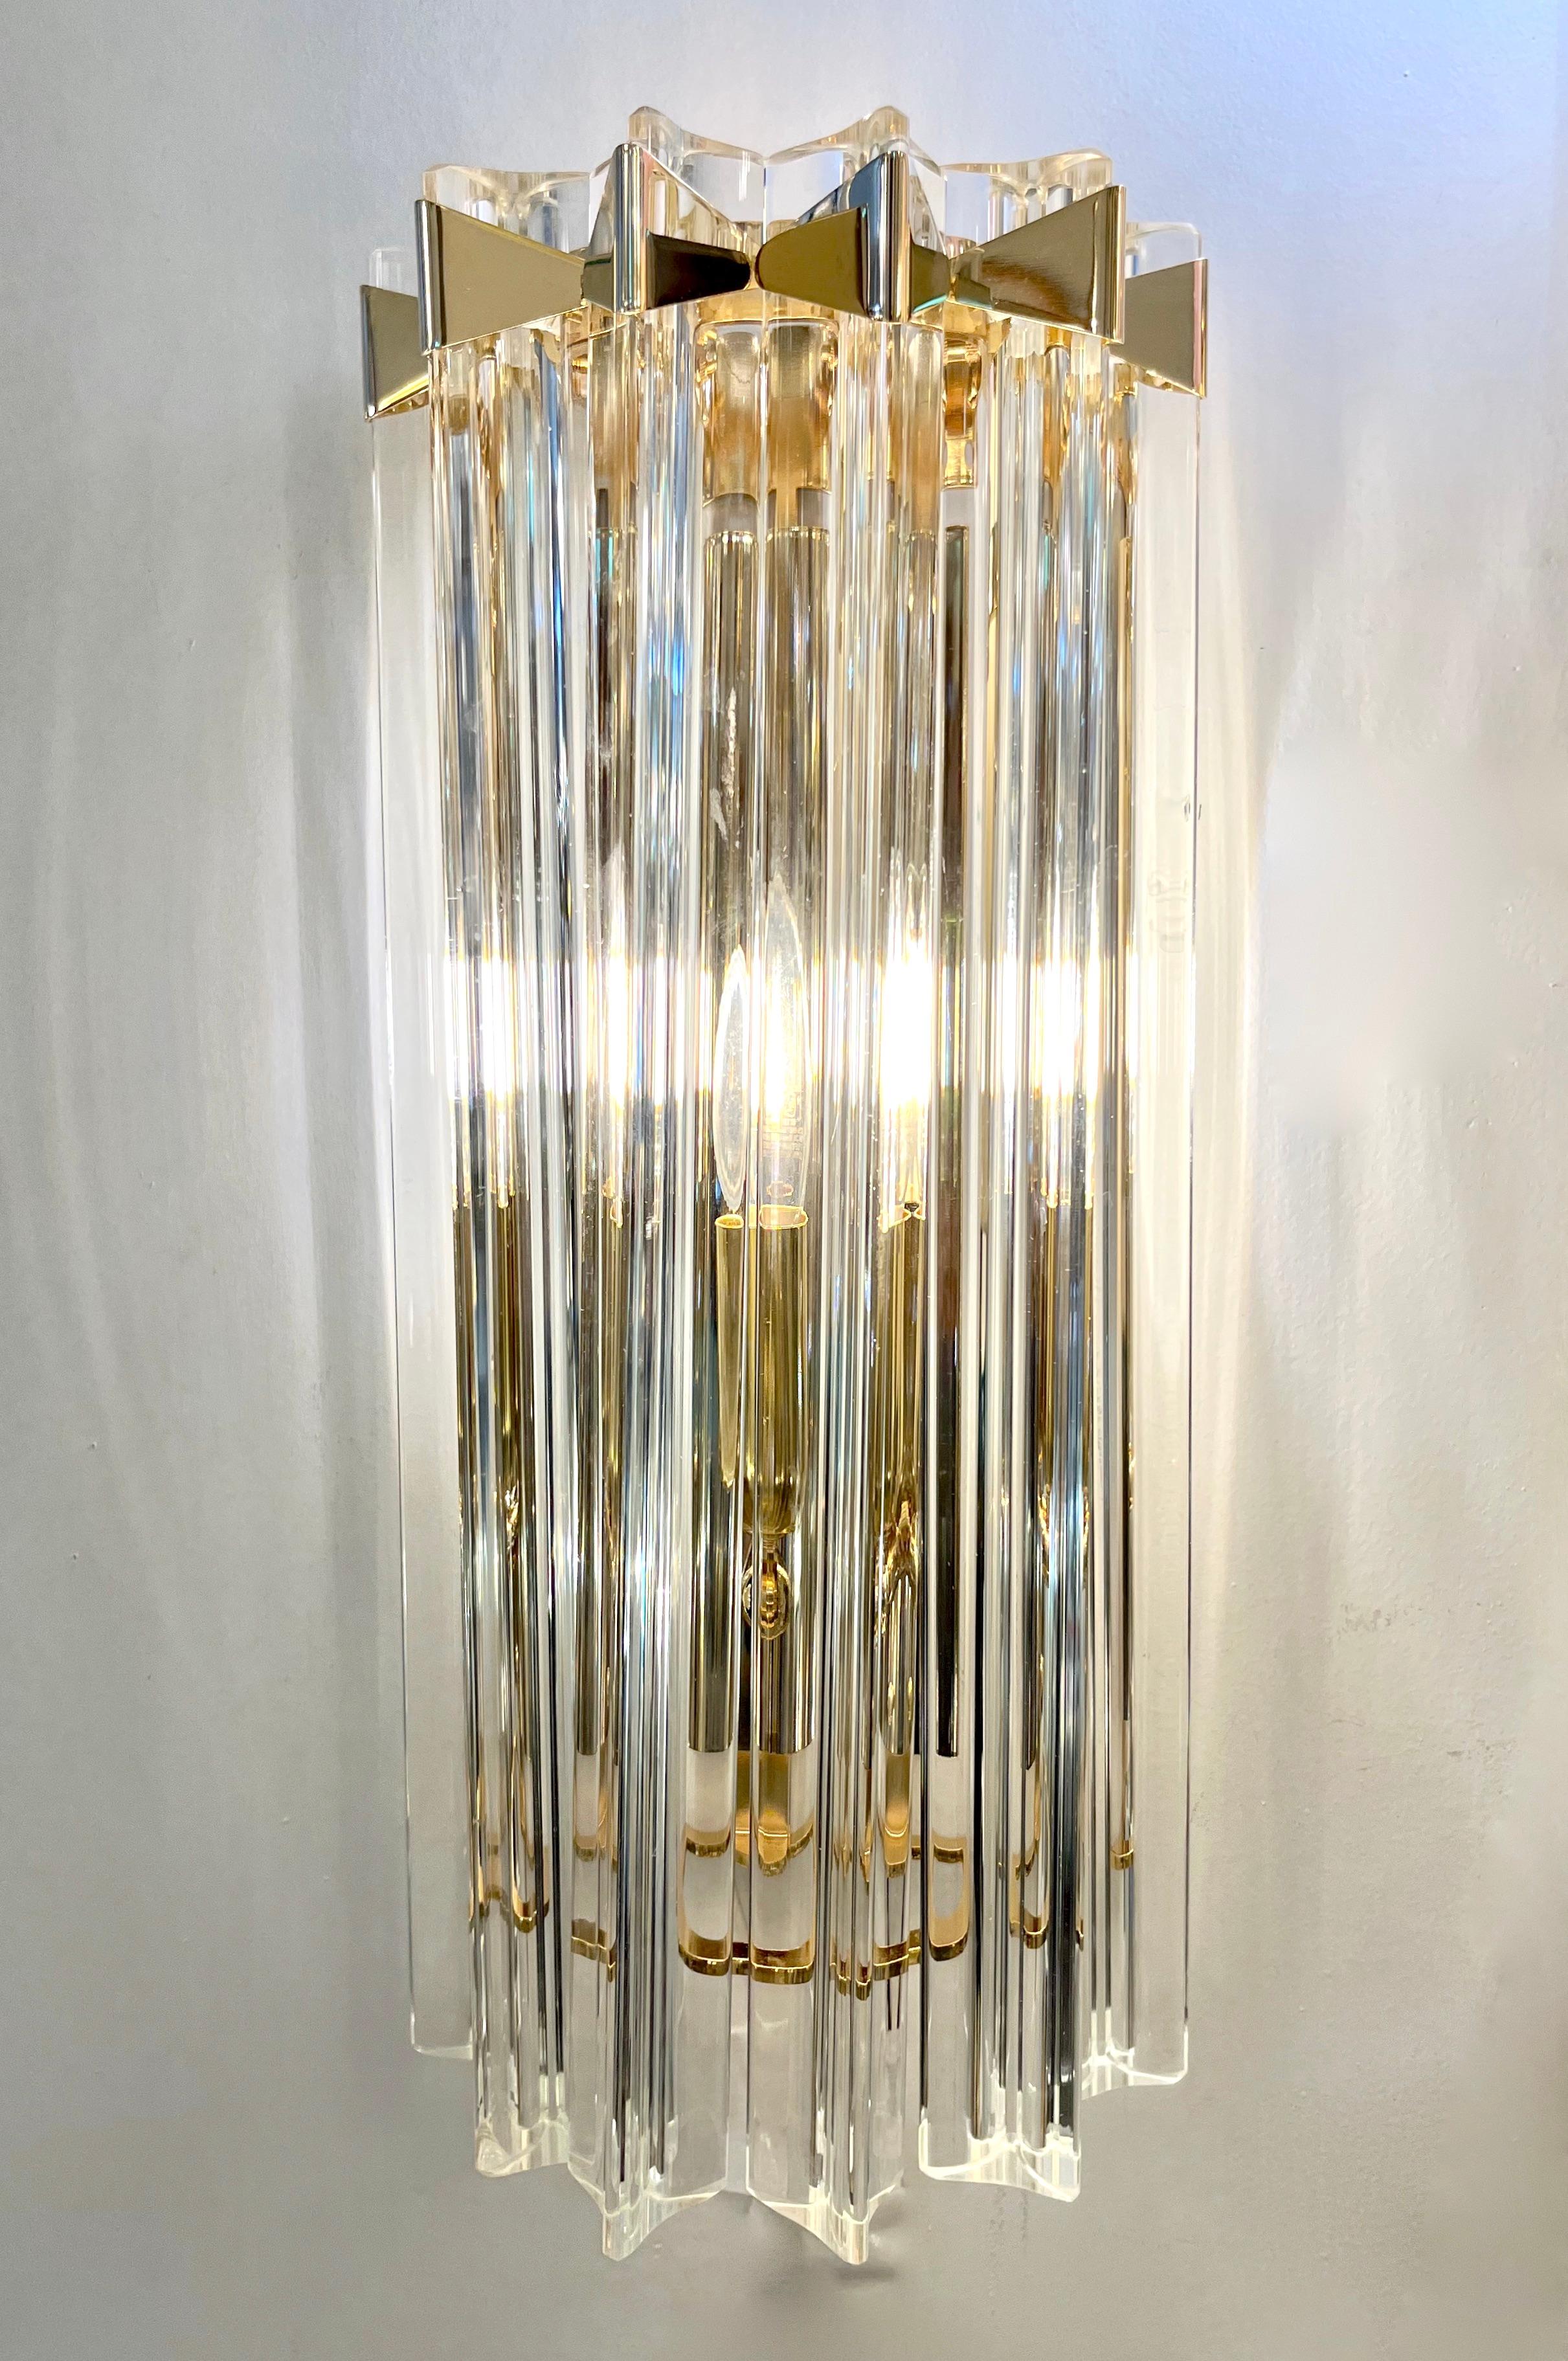 Very sleek Venetian wall light with organic Minimalist design and Art Deco flair, consisting of six spectacular straight crystal clear Murano glass rods of triangular section with stunning concave sides that amplifies the light reflections and